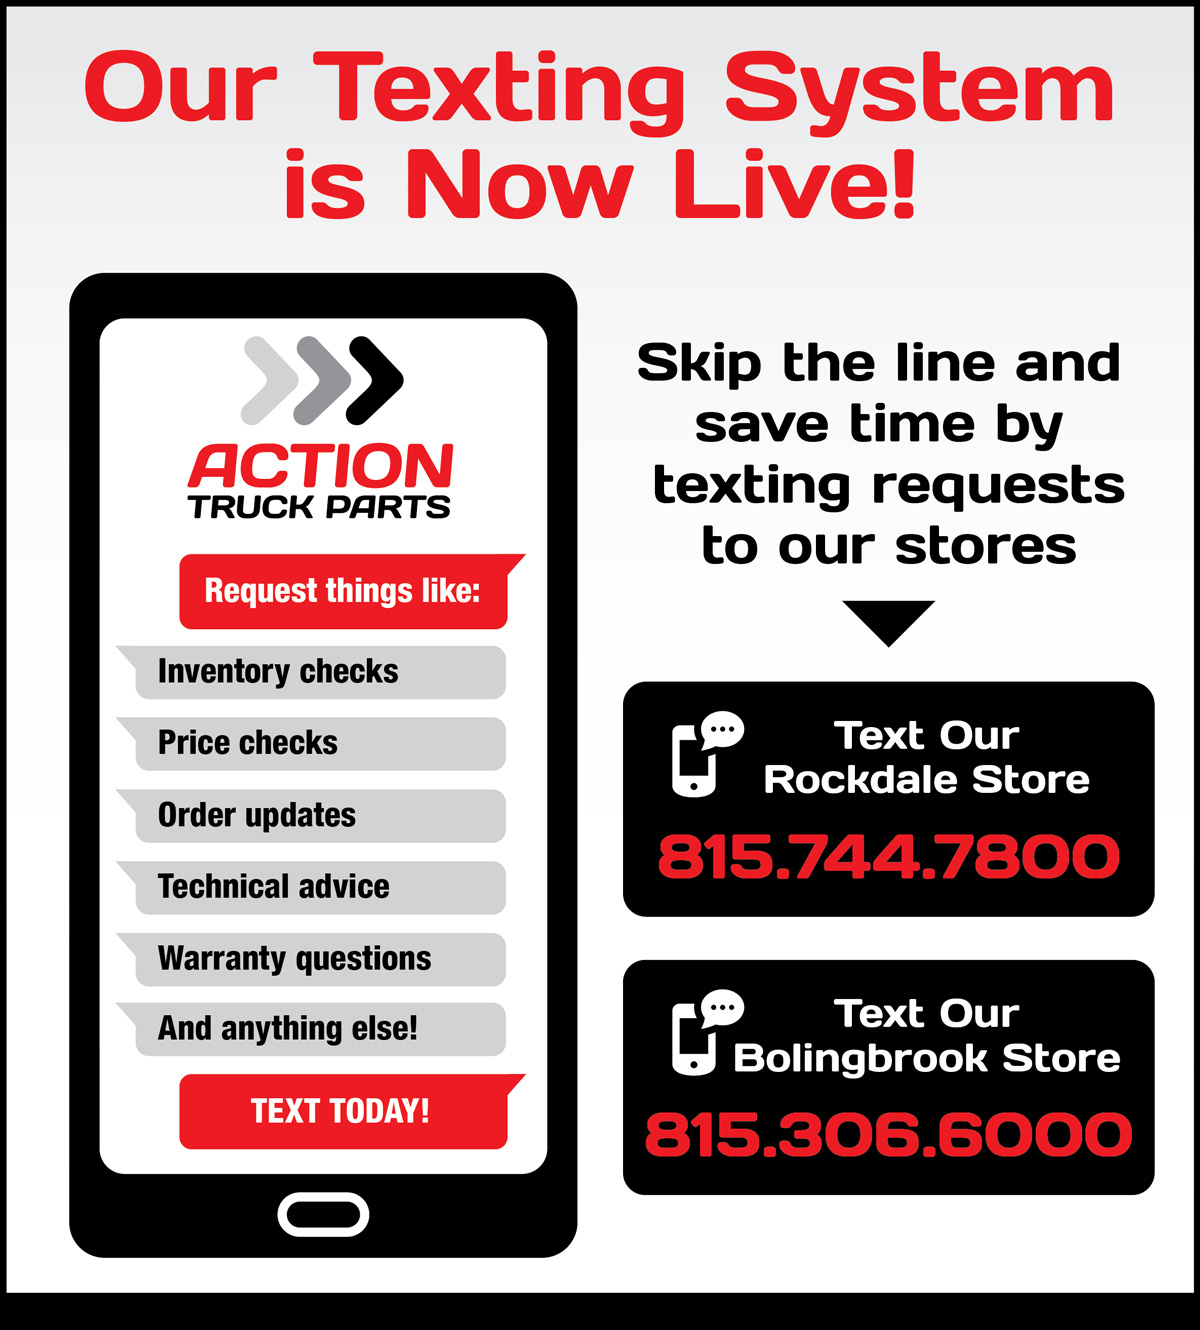 Text Services are Live